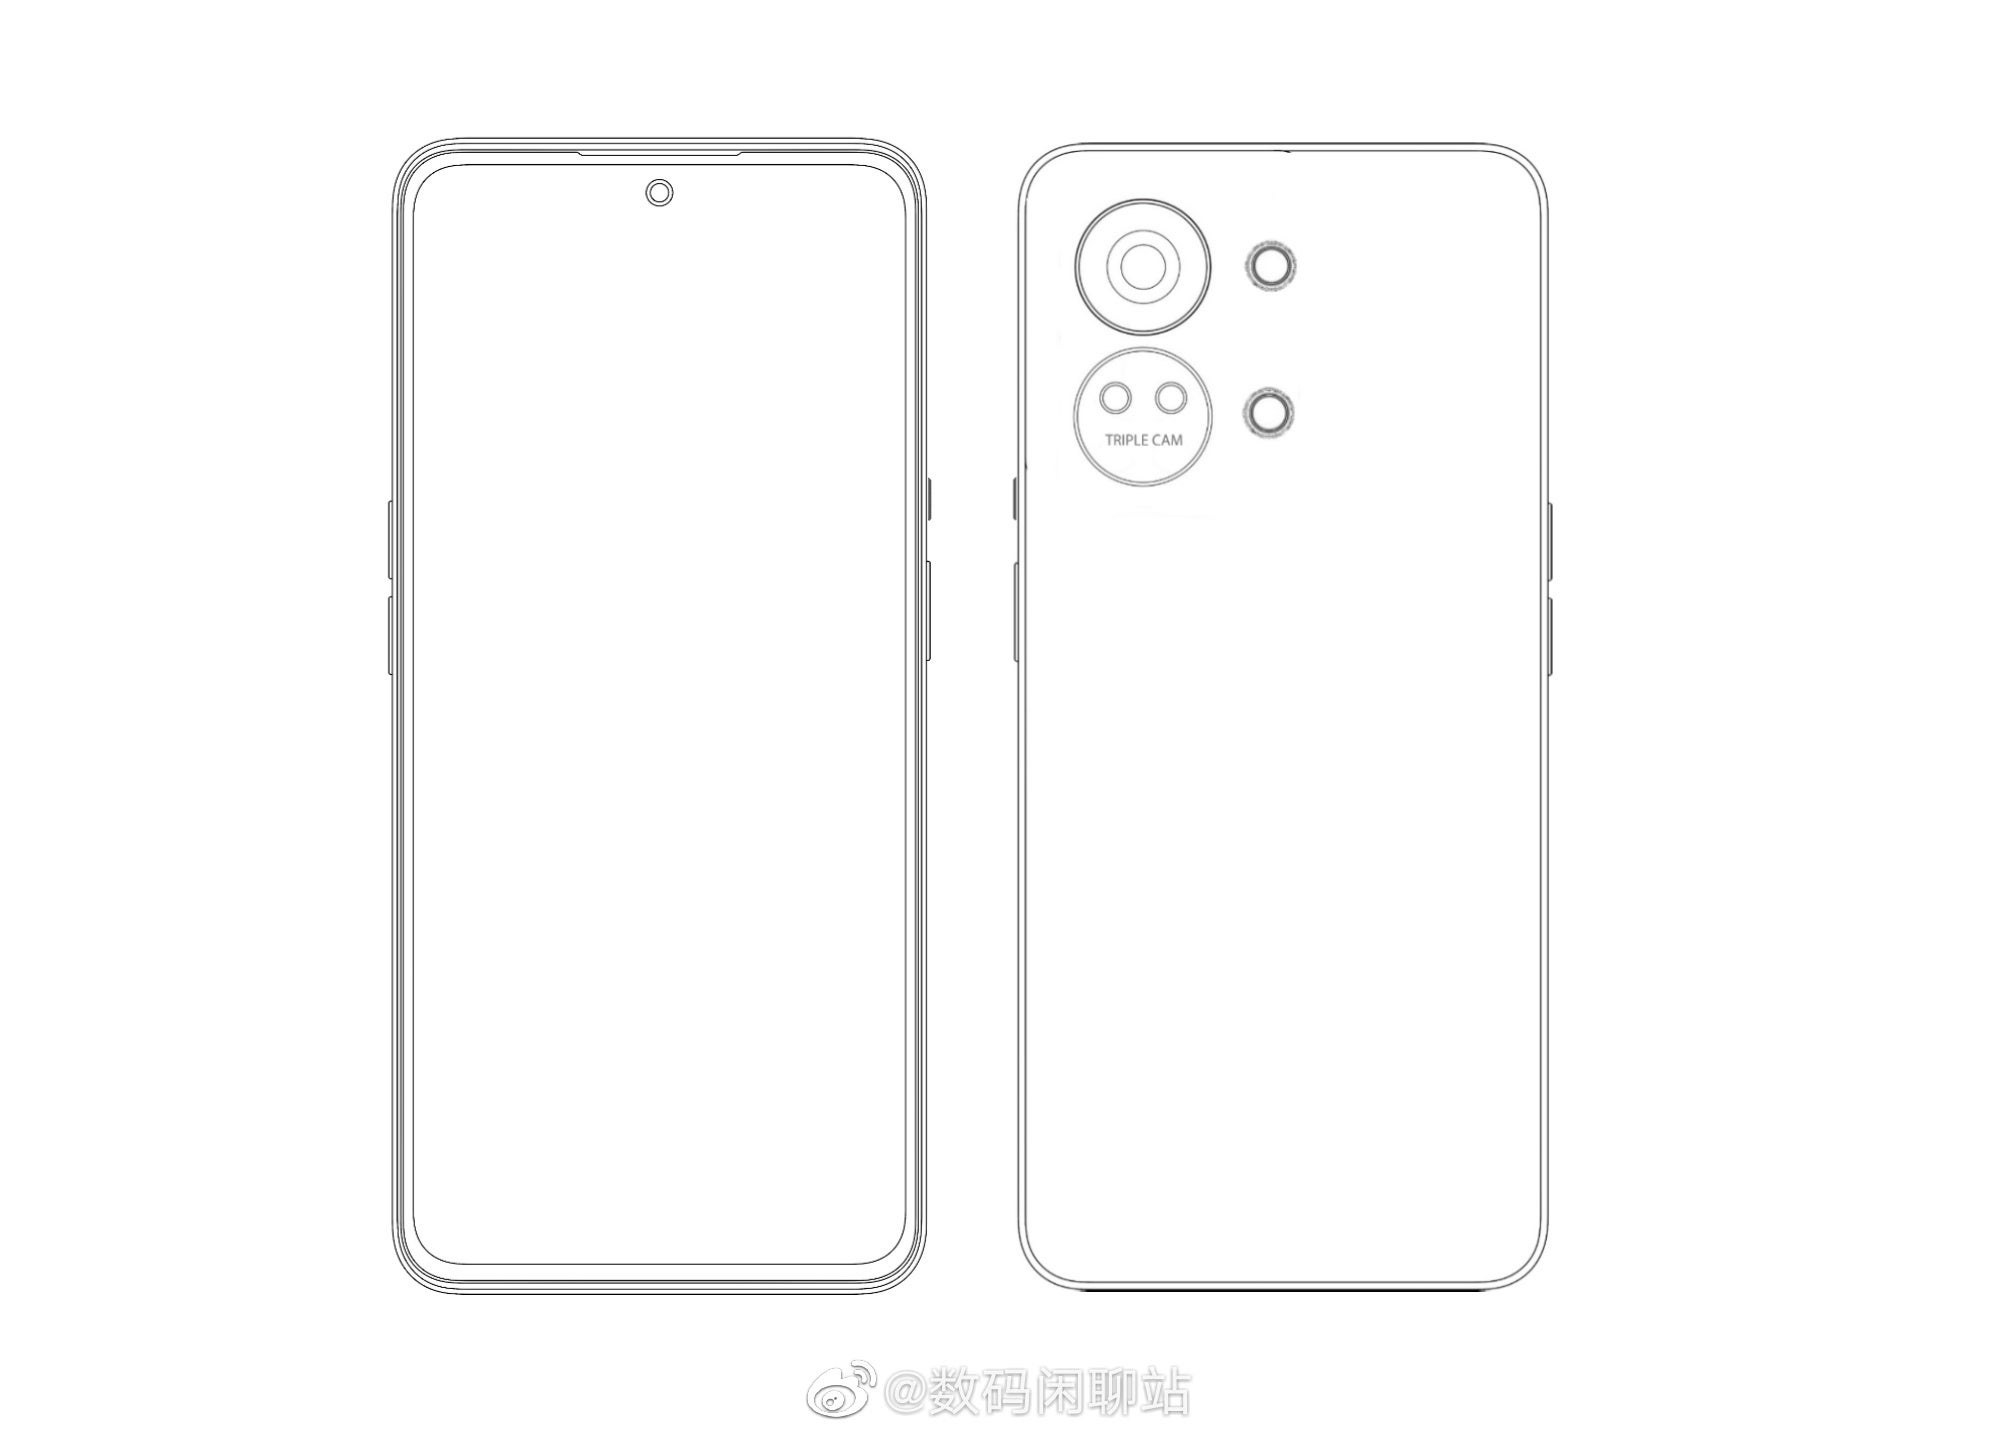 OnePlus Nord 3 sketch - New OnePlus Nord 3 leak confirms a 120Hz AMOLED display